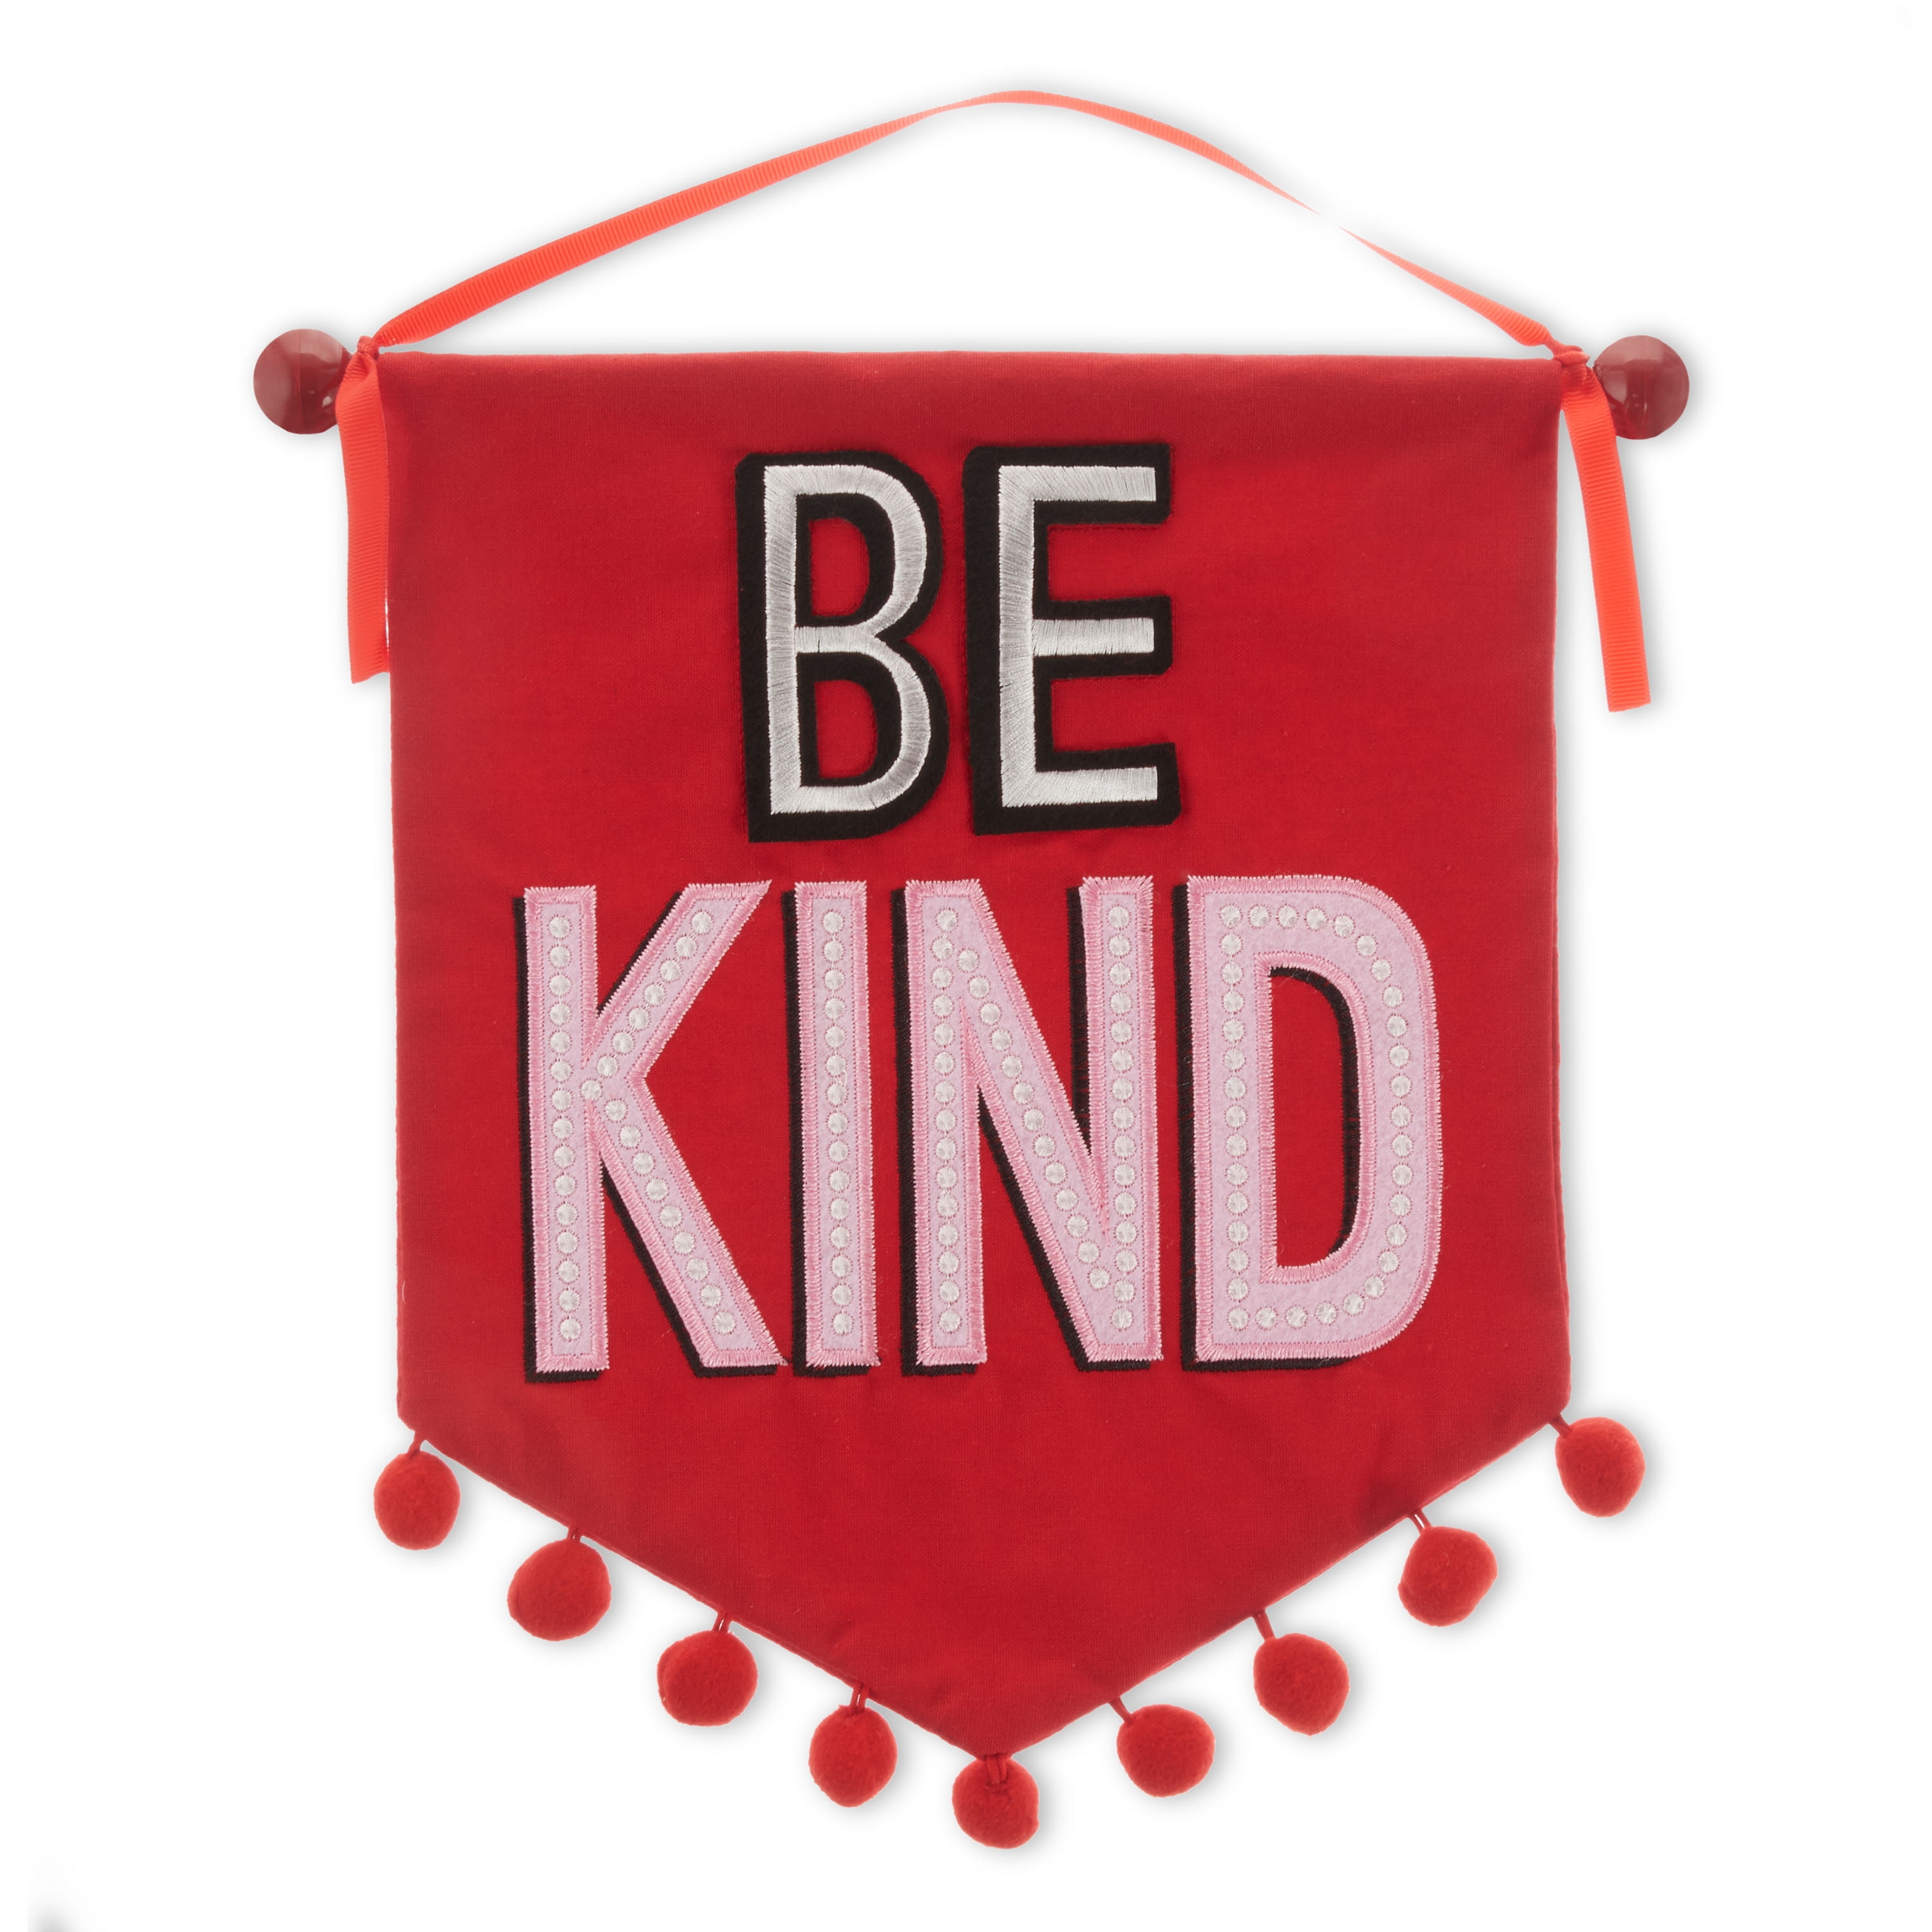 WAY TO CELEBRATE! Way To Celebrate Valentine Red Be Kind Banner Hanging Fabric Wall Decoration